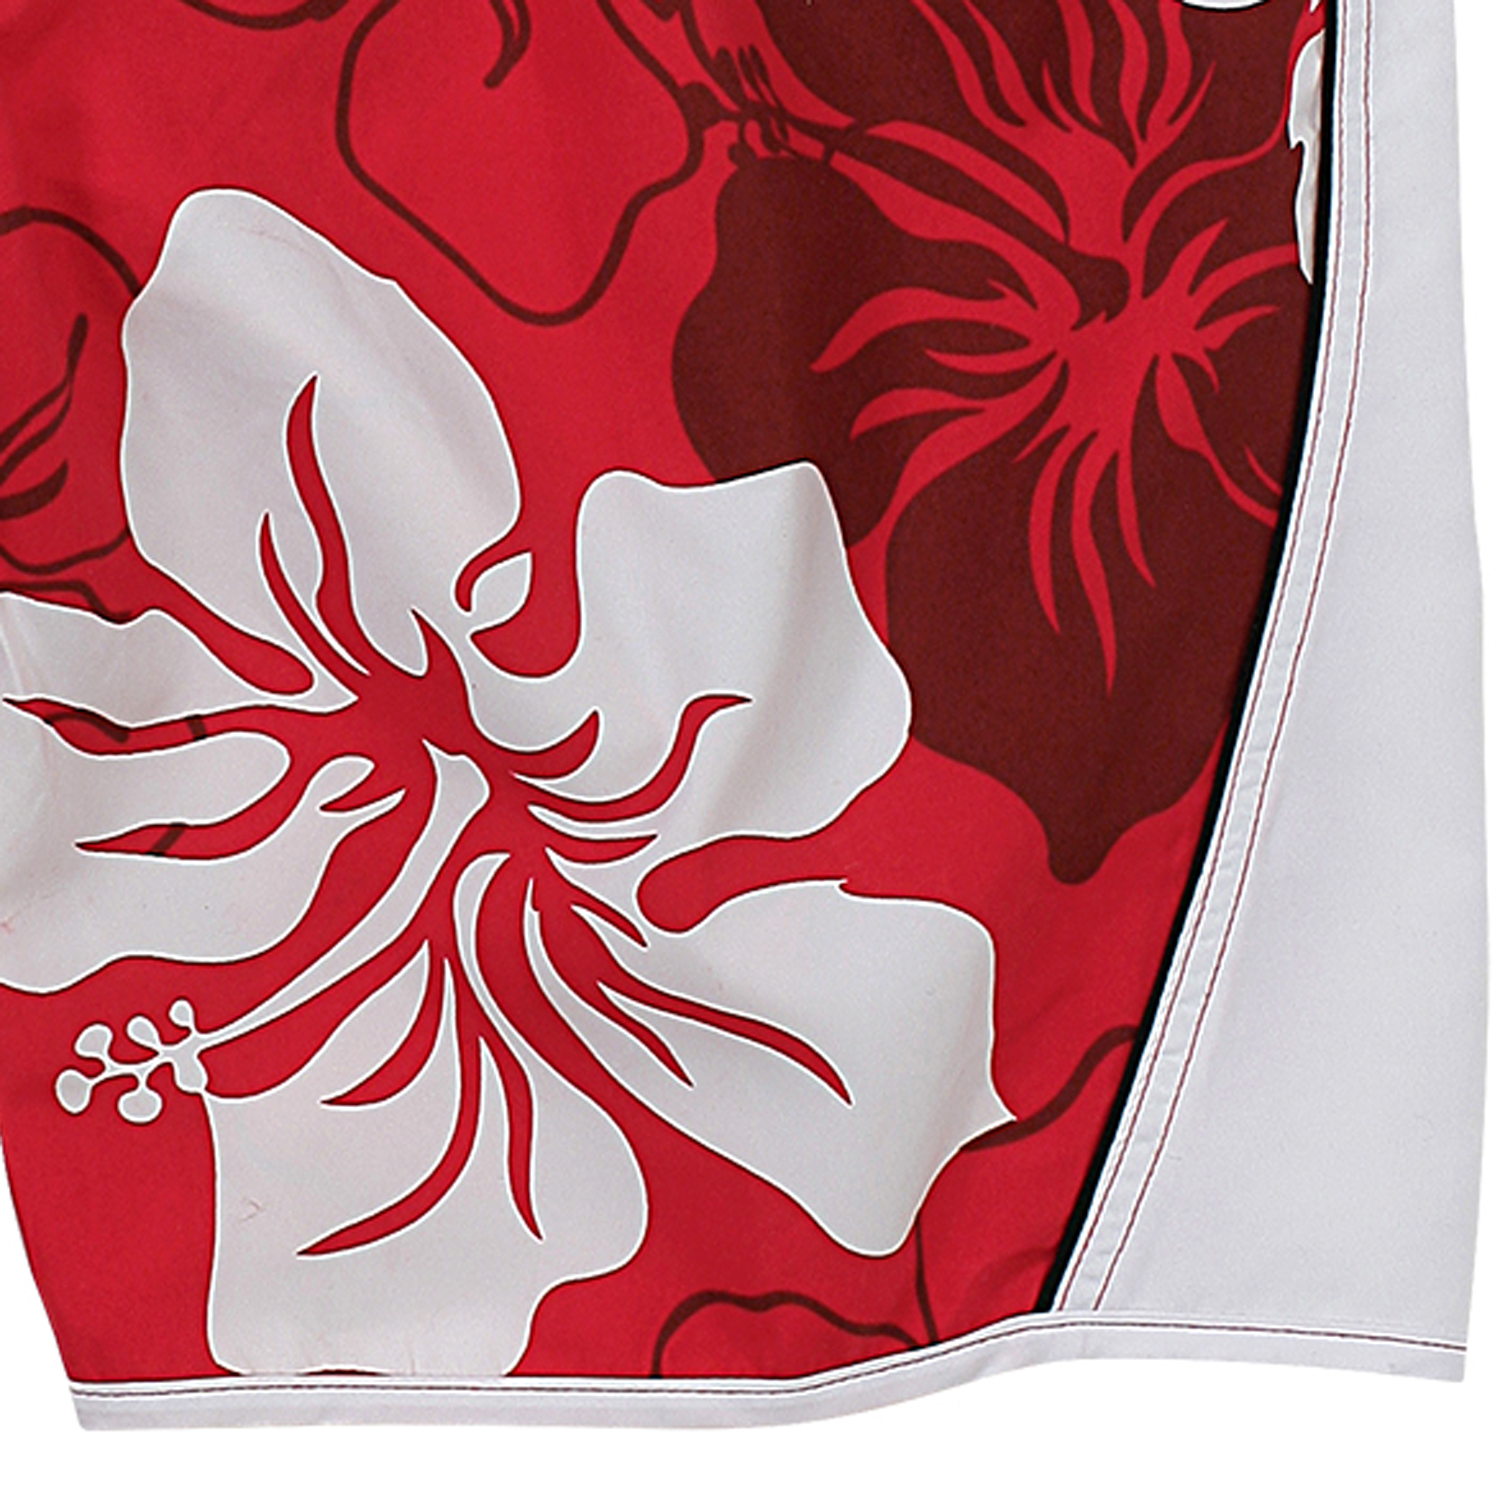 Swim bermudas in red-white with flower print by eleMar up to oversize 9XL